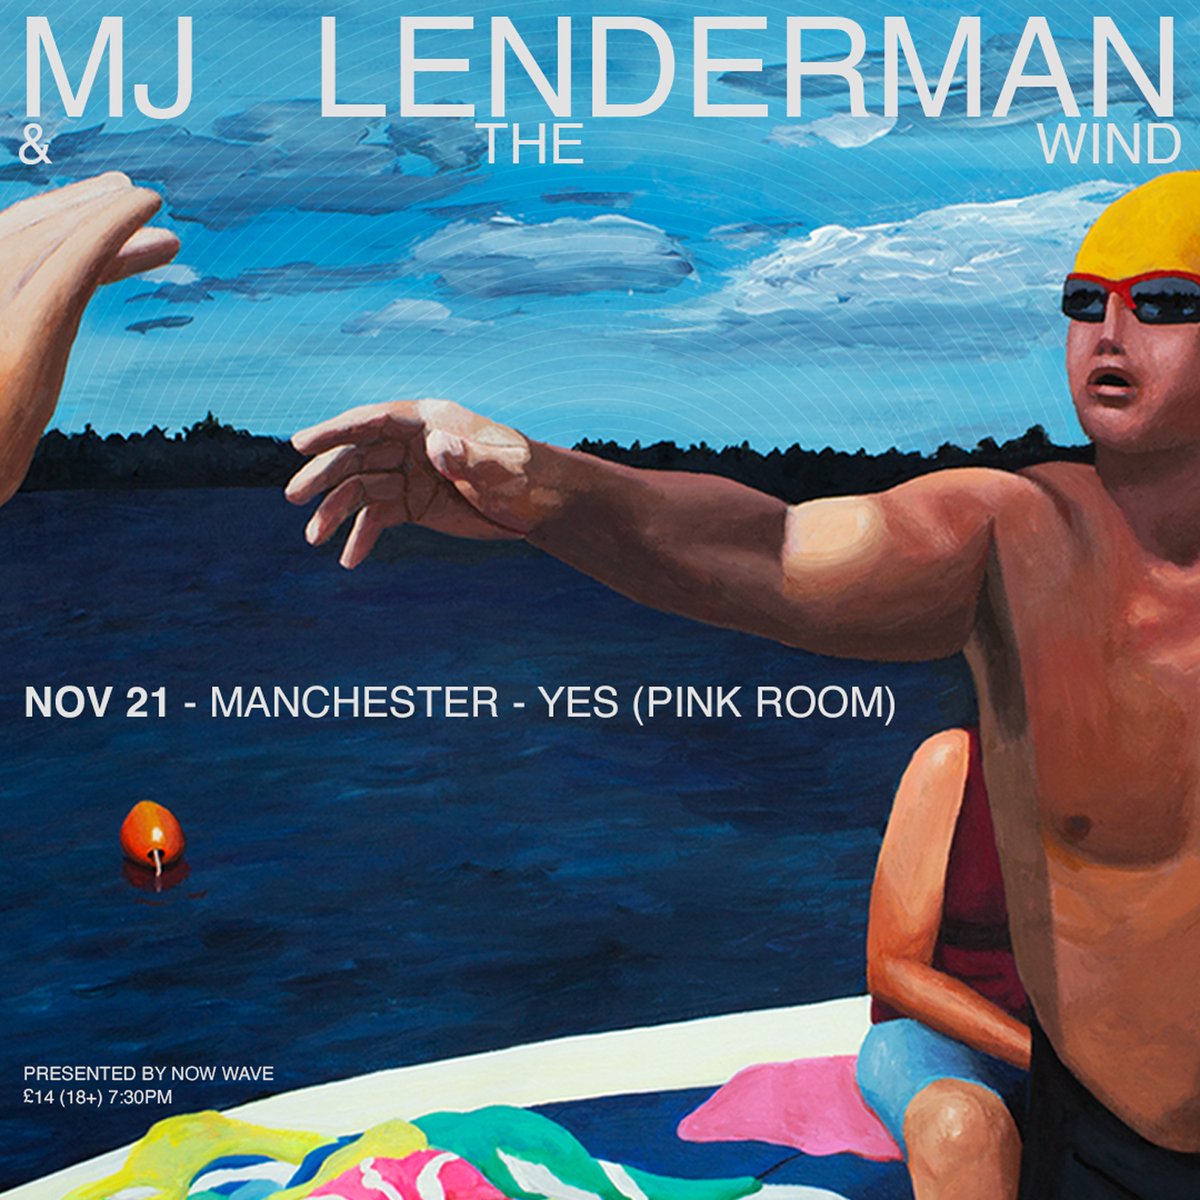 NEW SHOW... @MarkJLenderman will perform at YES Pink Room on November 21st. Tickets are on sale tomorrow at 10am. 'the Asheville songwriter and guitarist polishes his alt-country vignettes with disarming insight and an immersive, fuzz-stacked sound.'